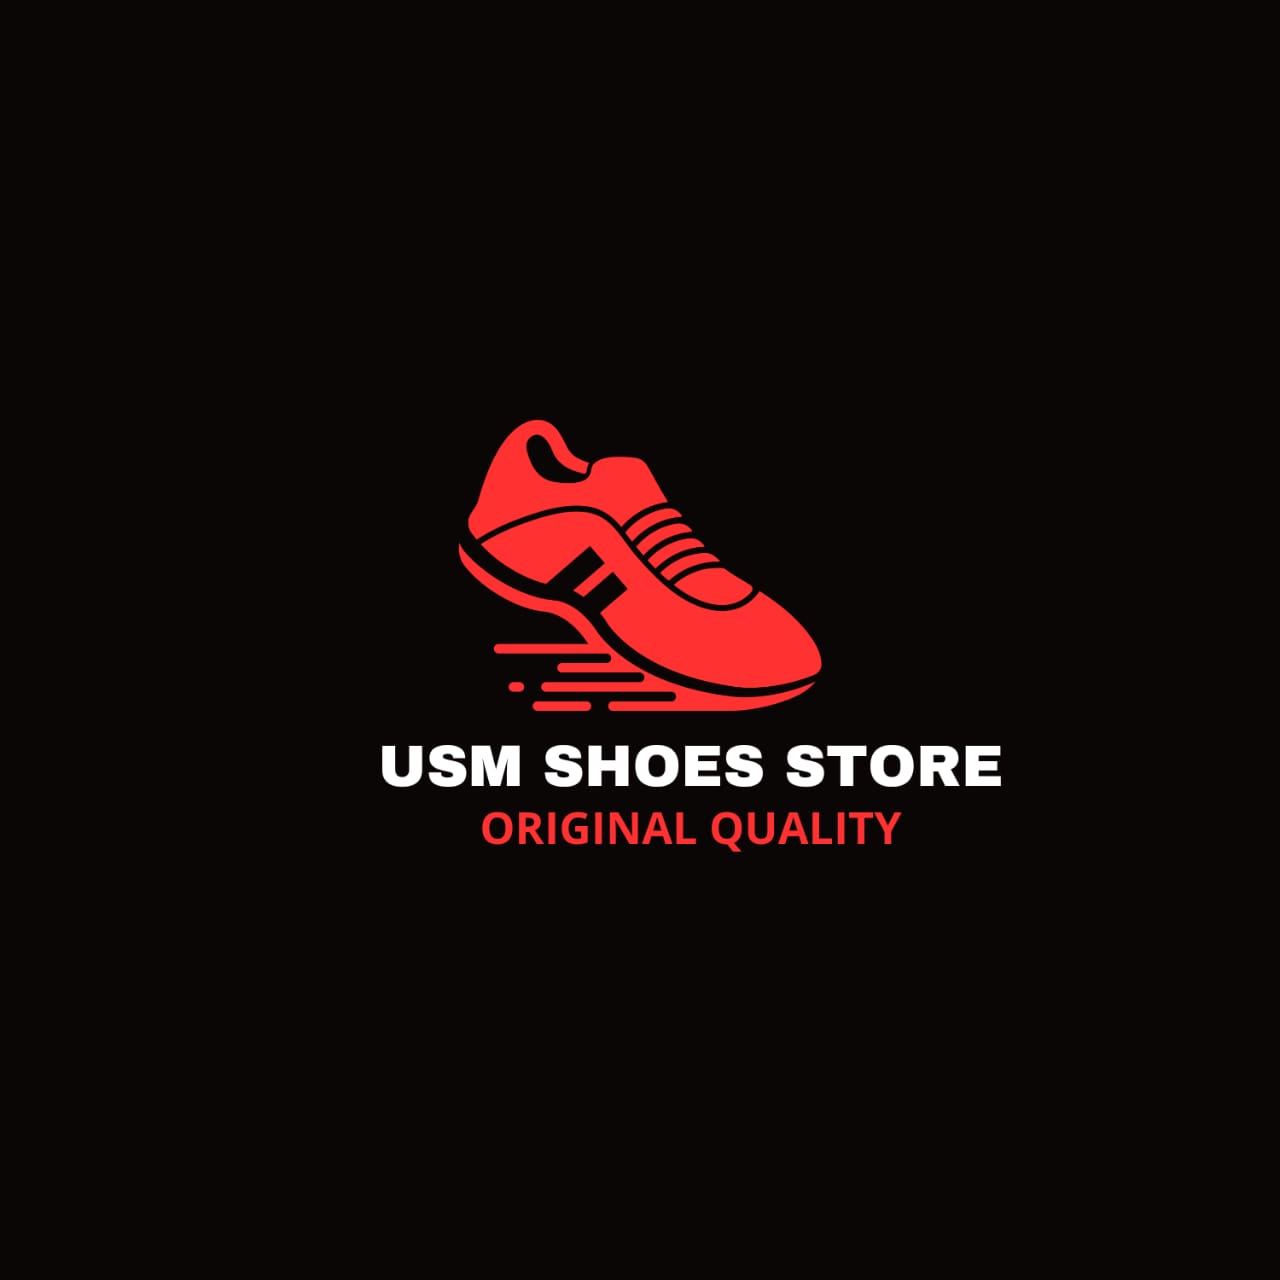 Pair of red shoes with the words usm shoes store.